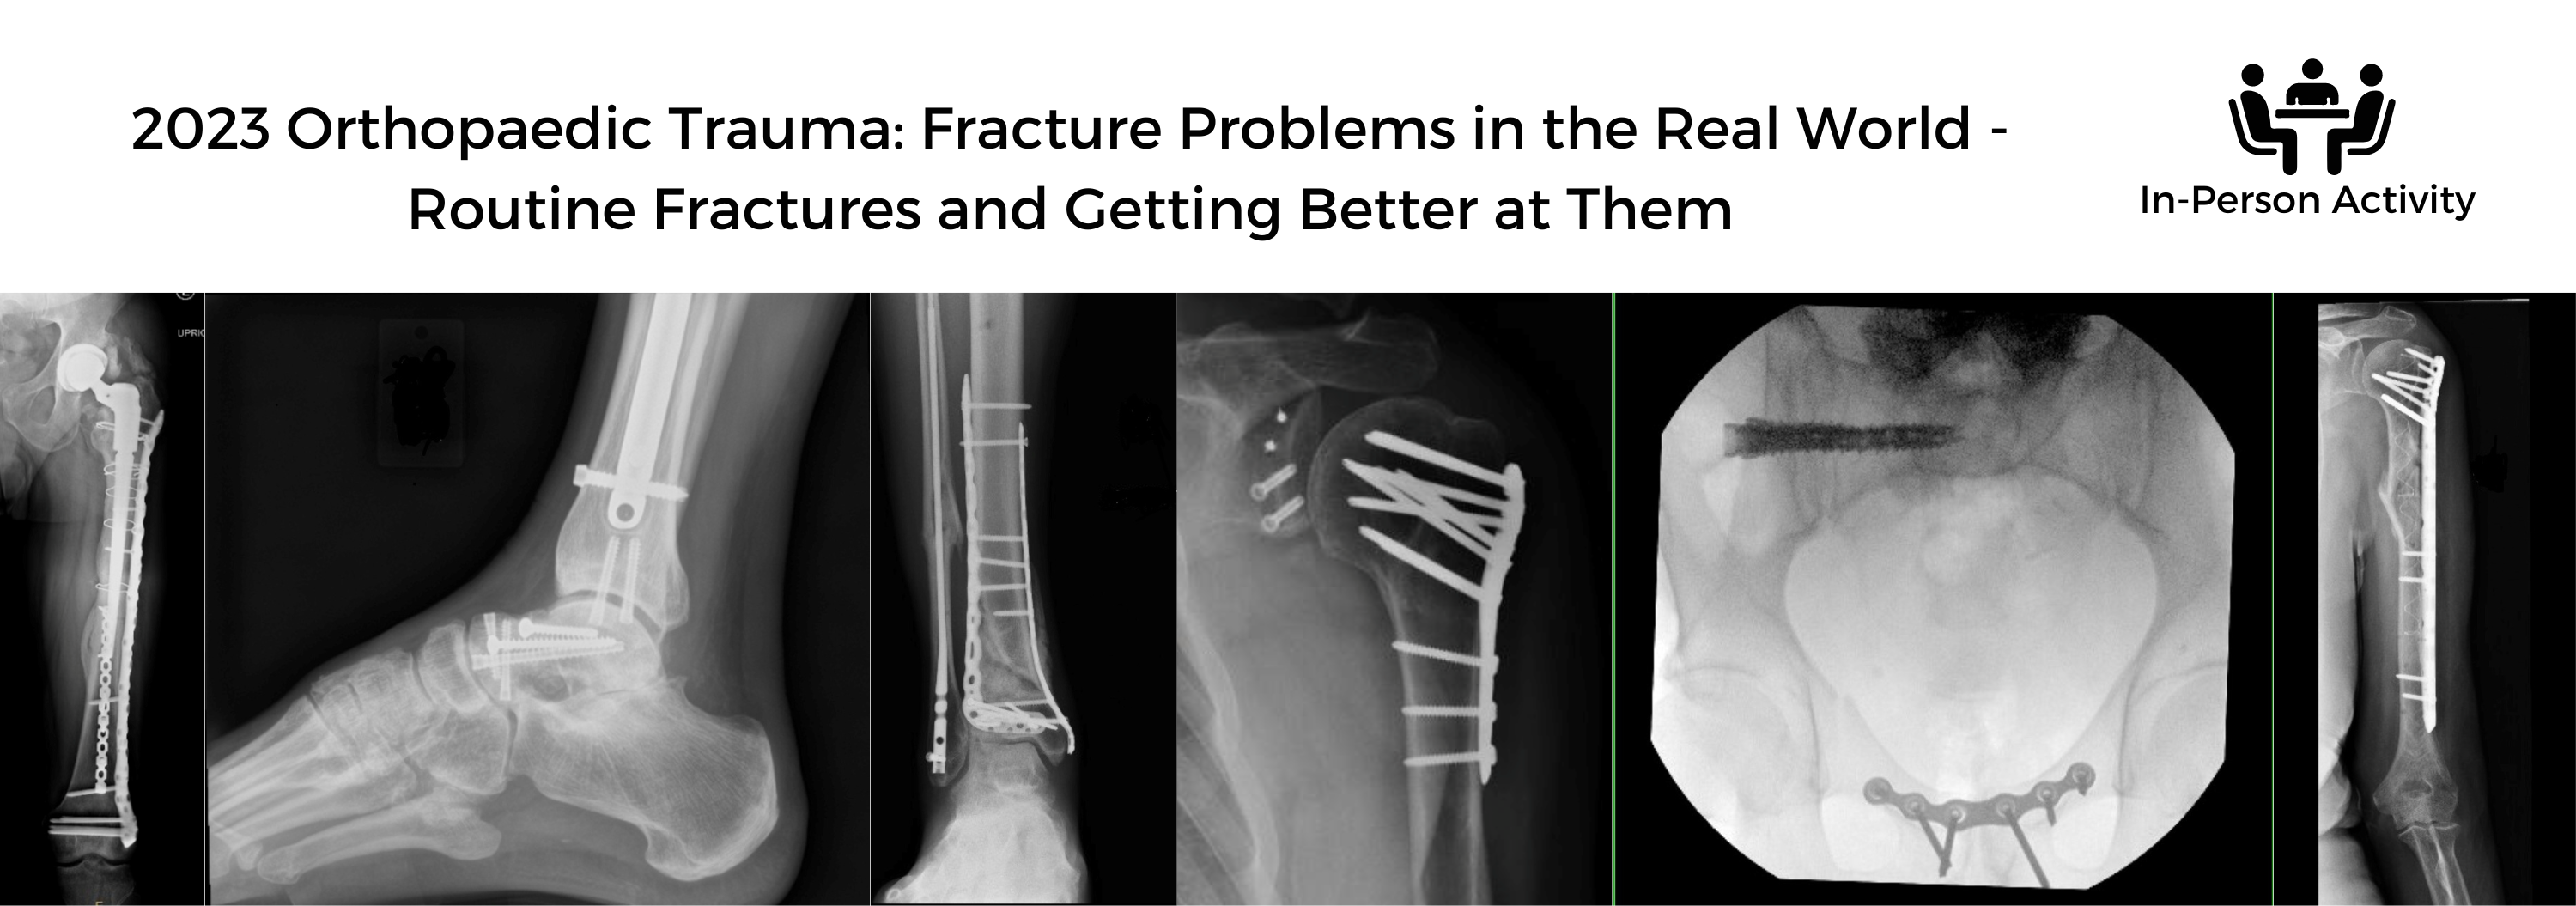 2023 Orthopaedic Trauma: Fracture Problems in the Real World - Routine Fractures and Getting Better at Them Banner